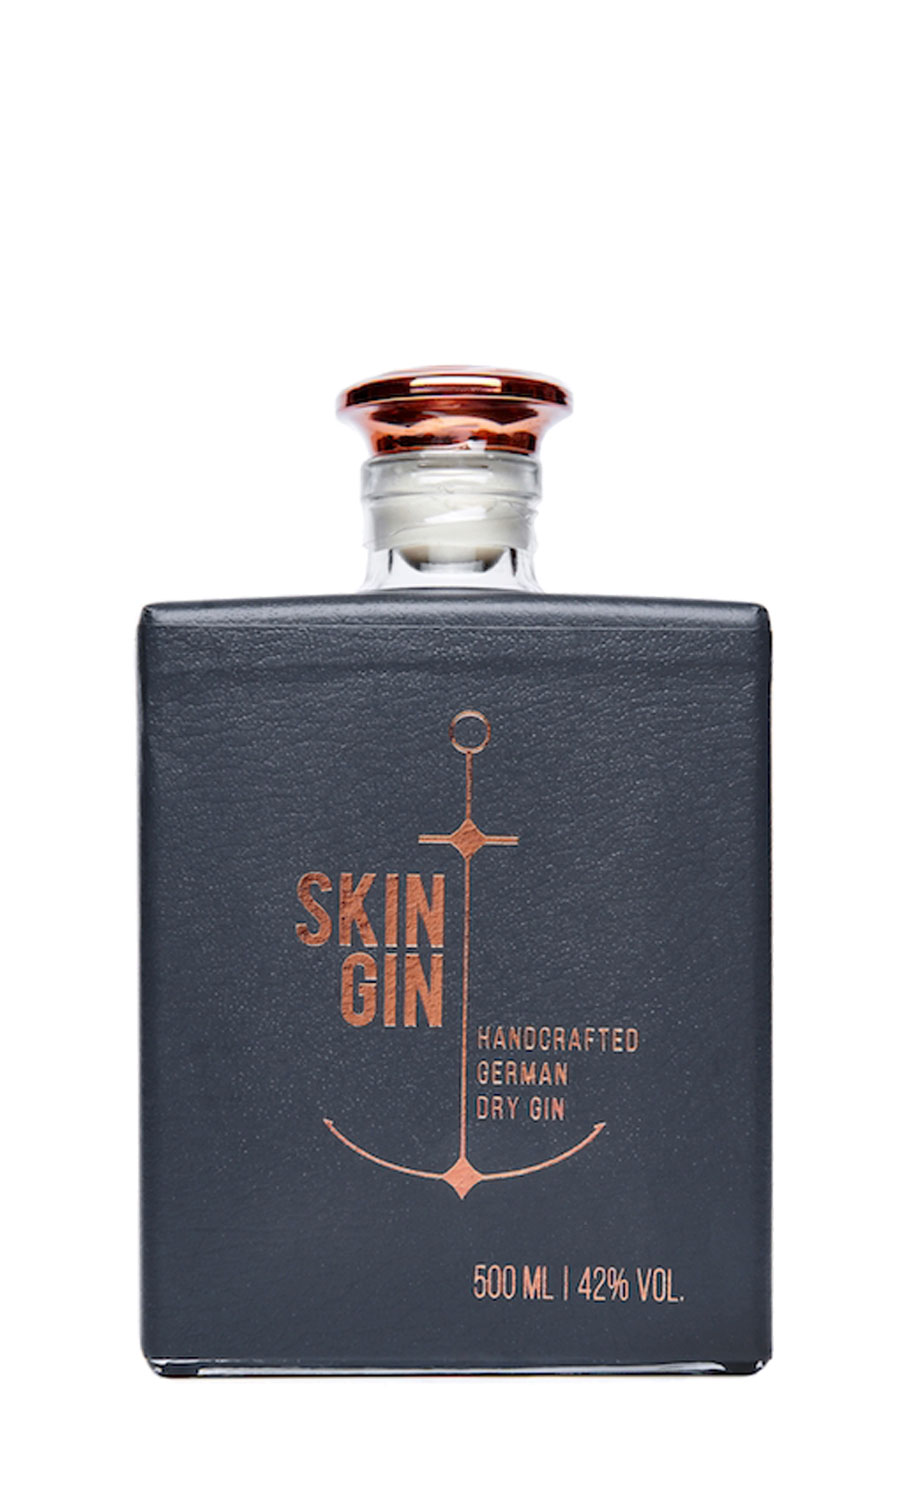 Skin Gin German Handcrafted Dry Gin 50cl (42% Vol)